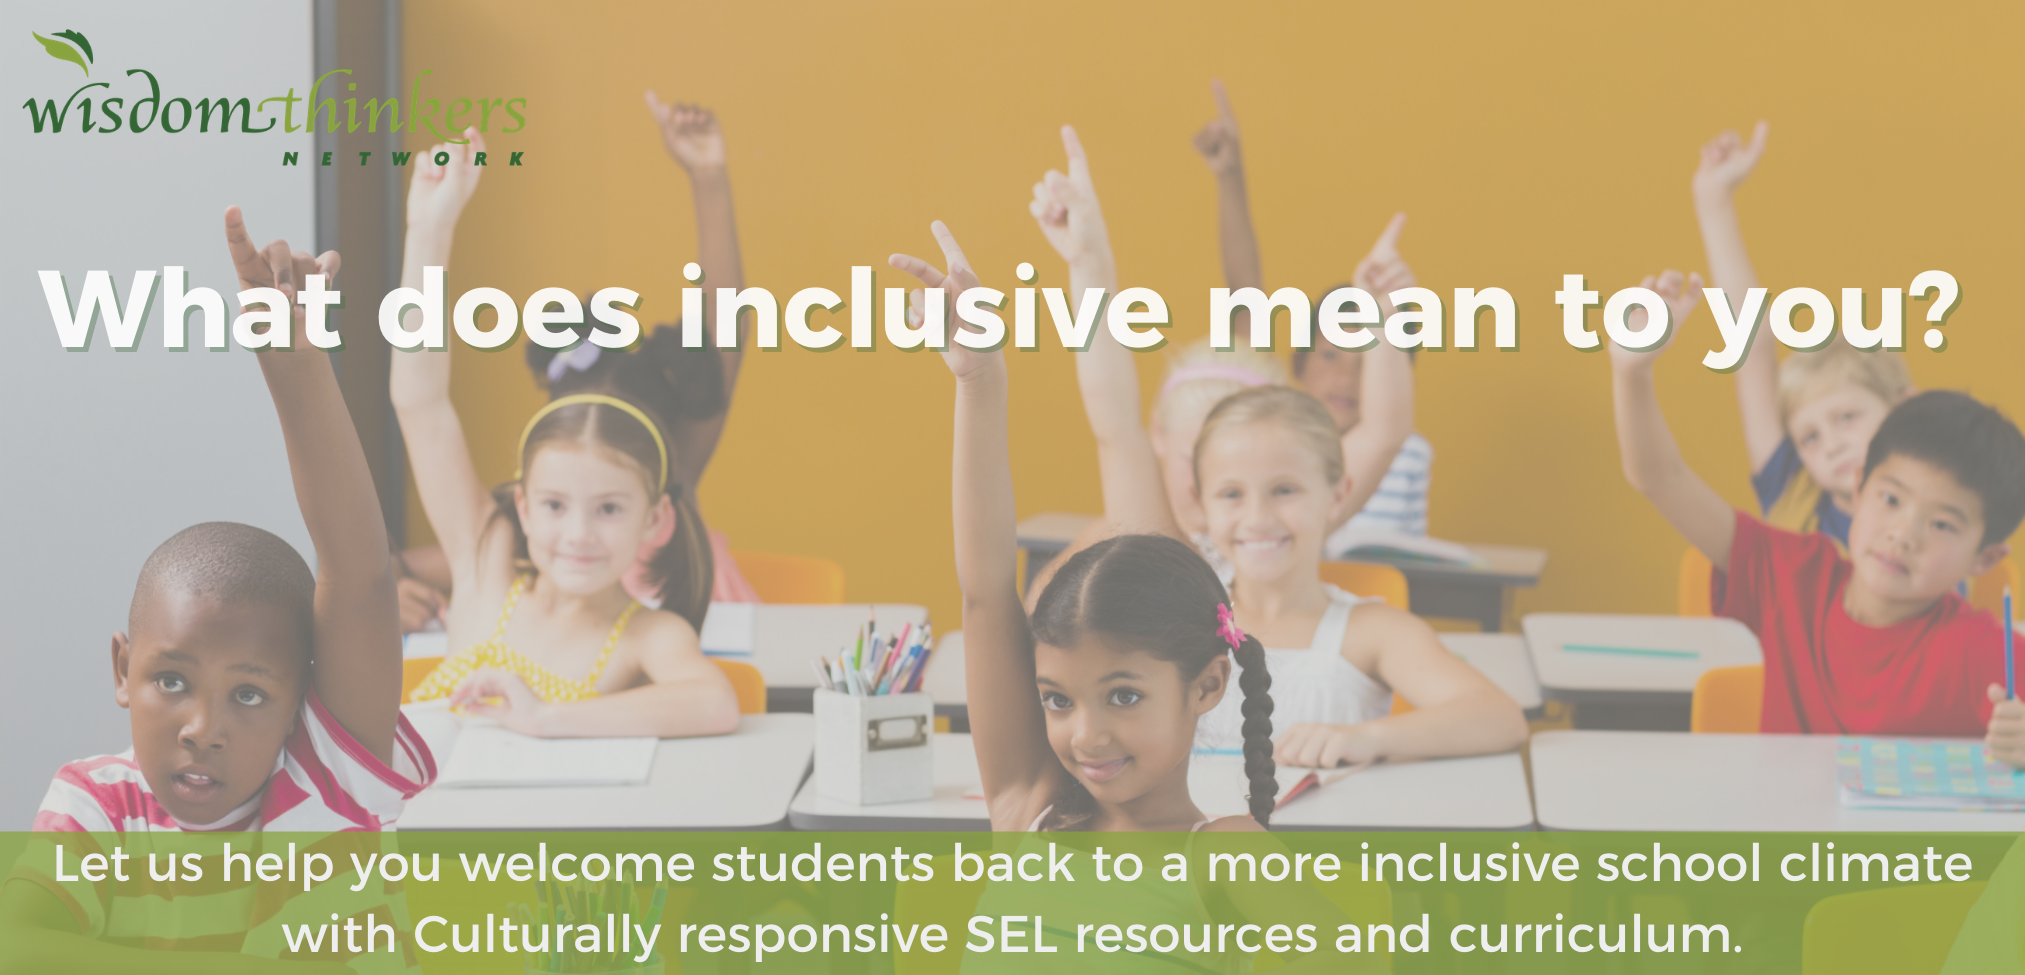 What does inclusive mean to you? Let us help you welcome students back to a more inclusive climate with Culturally responsive SEL resources and curriculum.